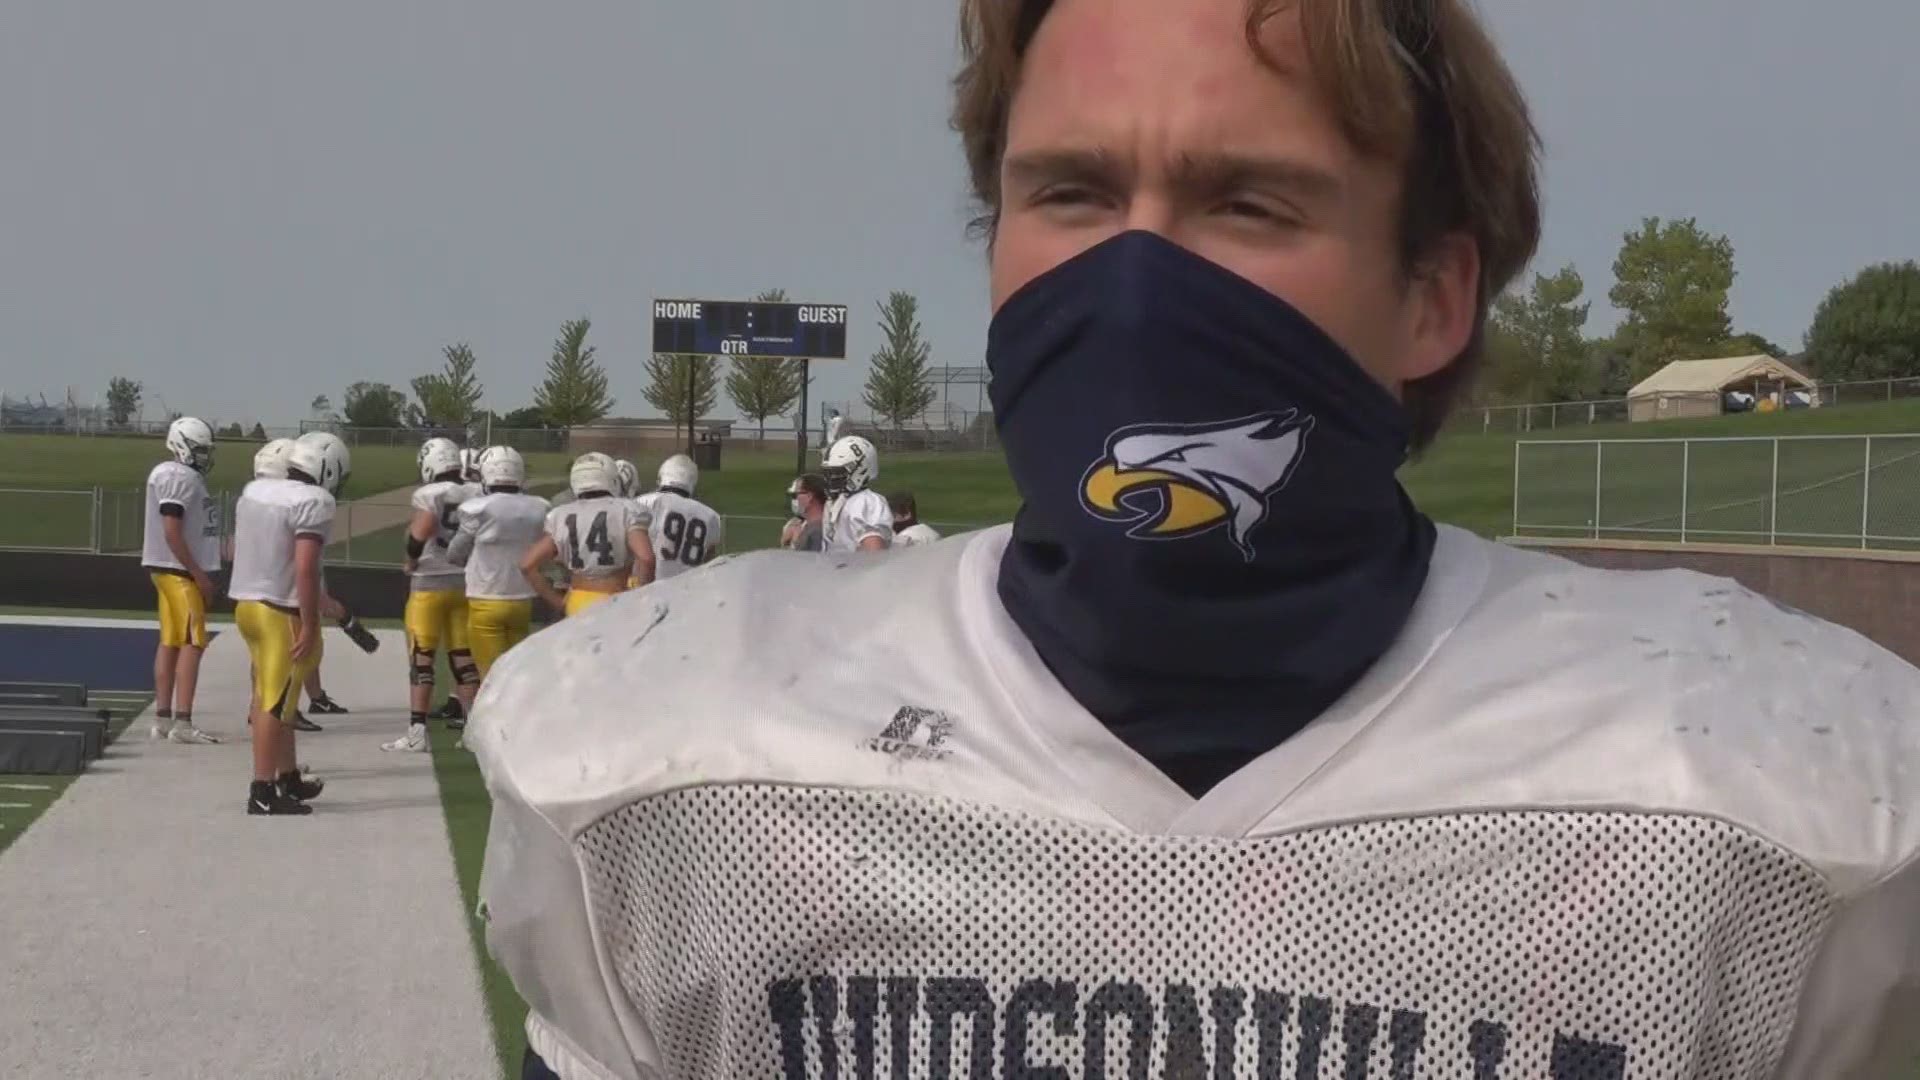 This Hudsonville football star hopes to study medicine in college